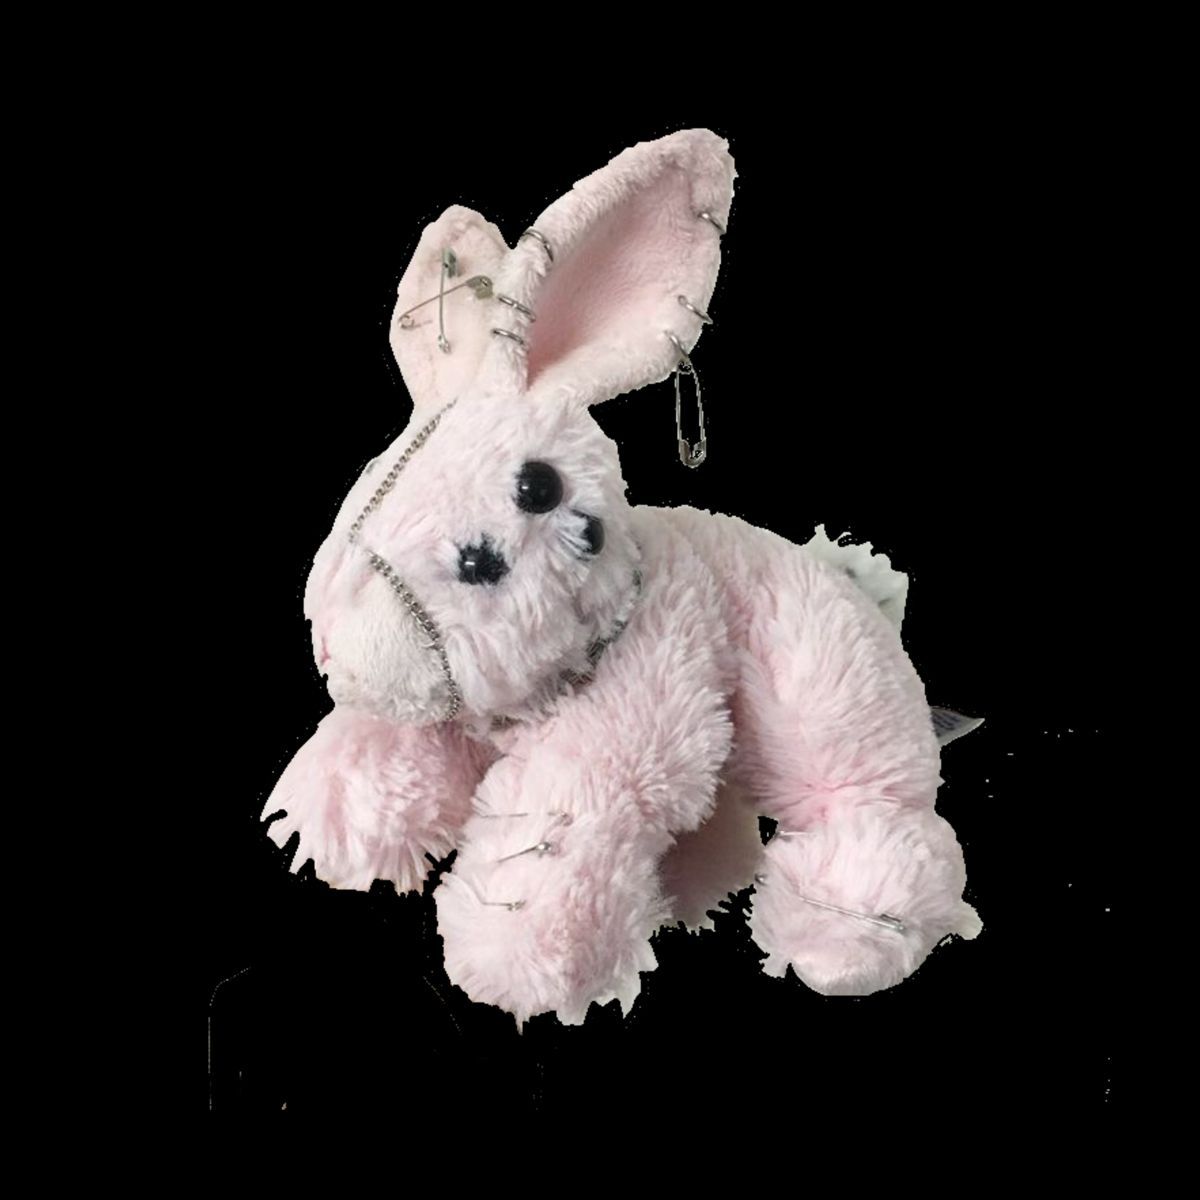 A pink stuffed animal rabbit with a zipper for a mouth. - Traumacore